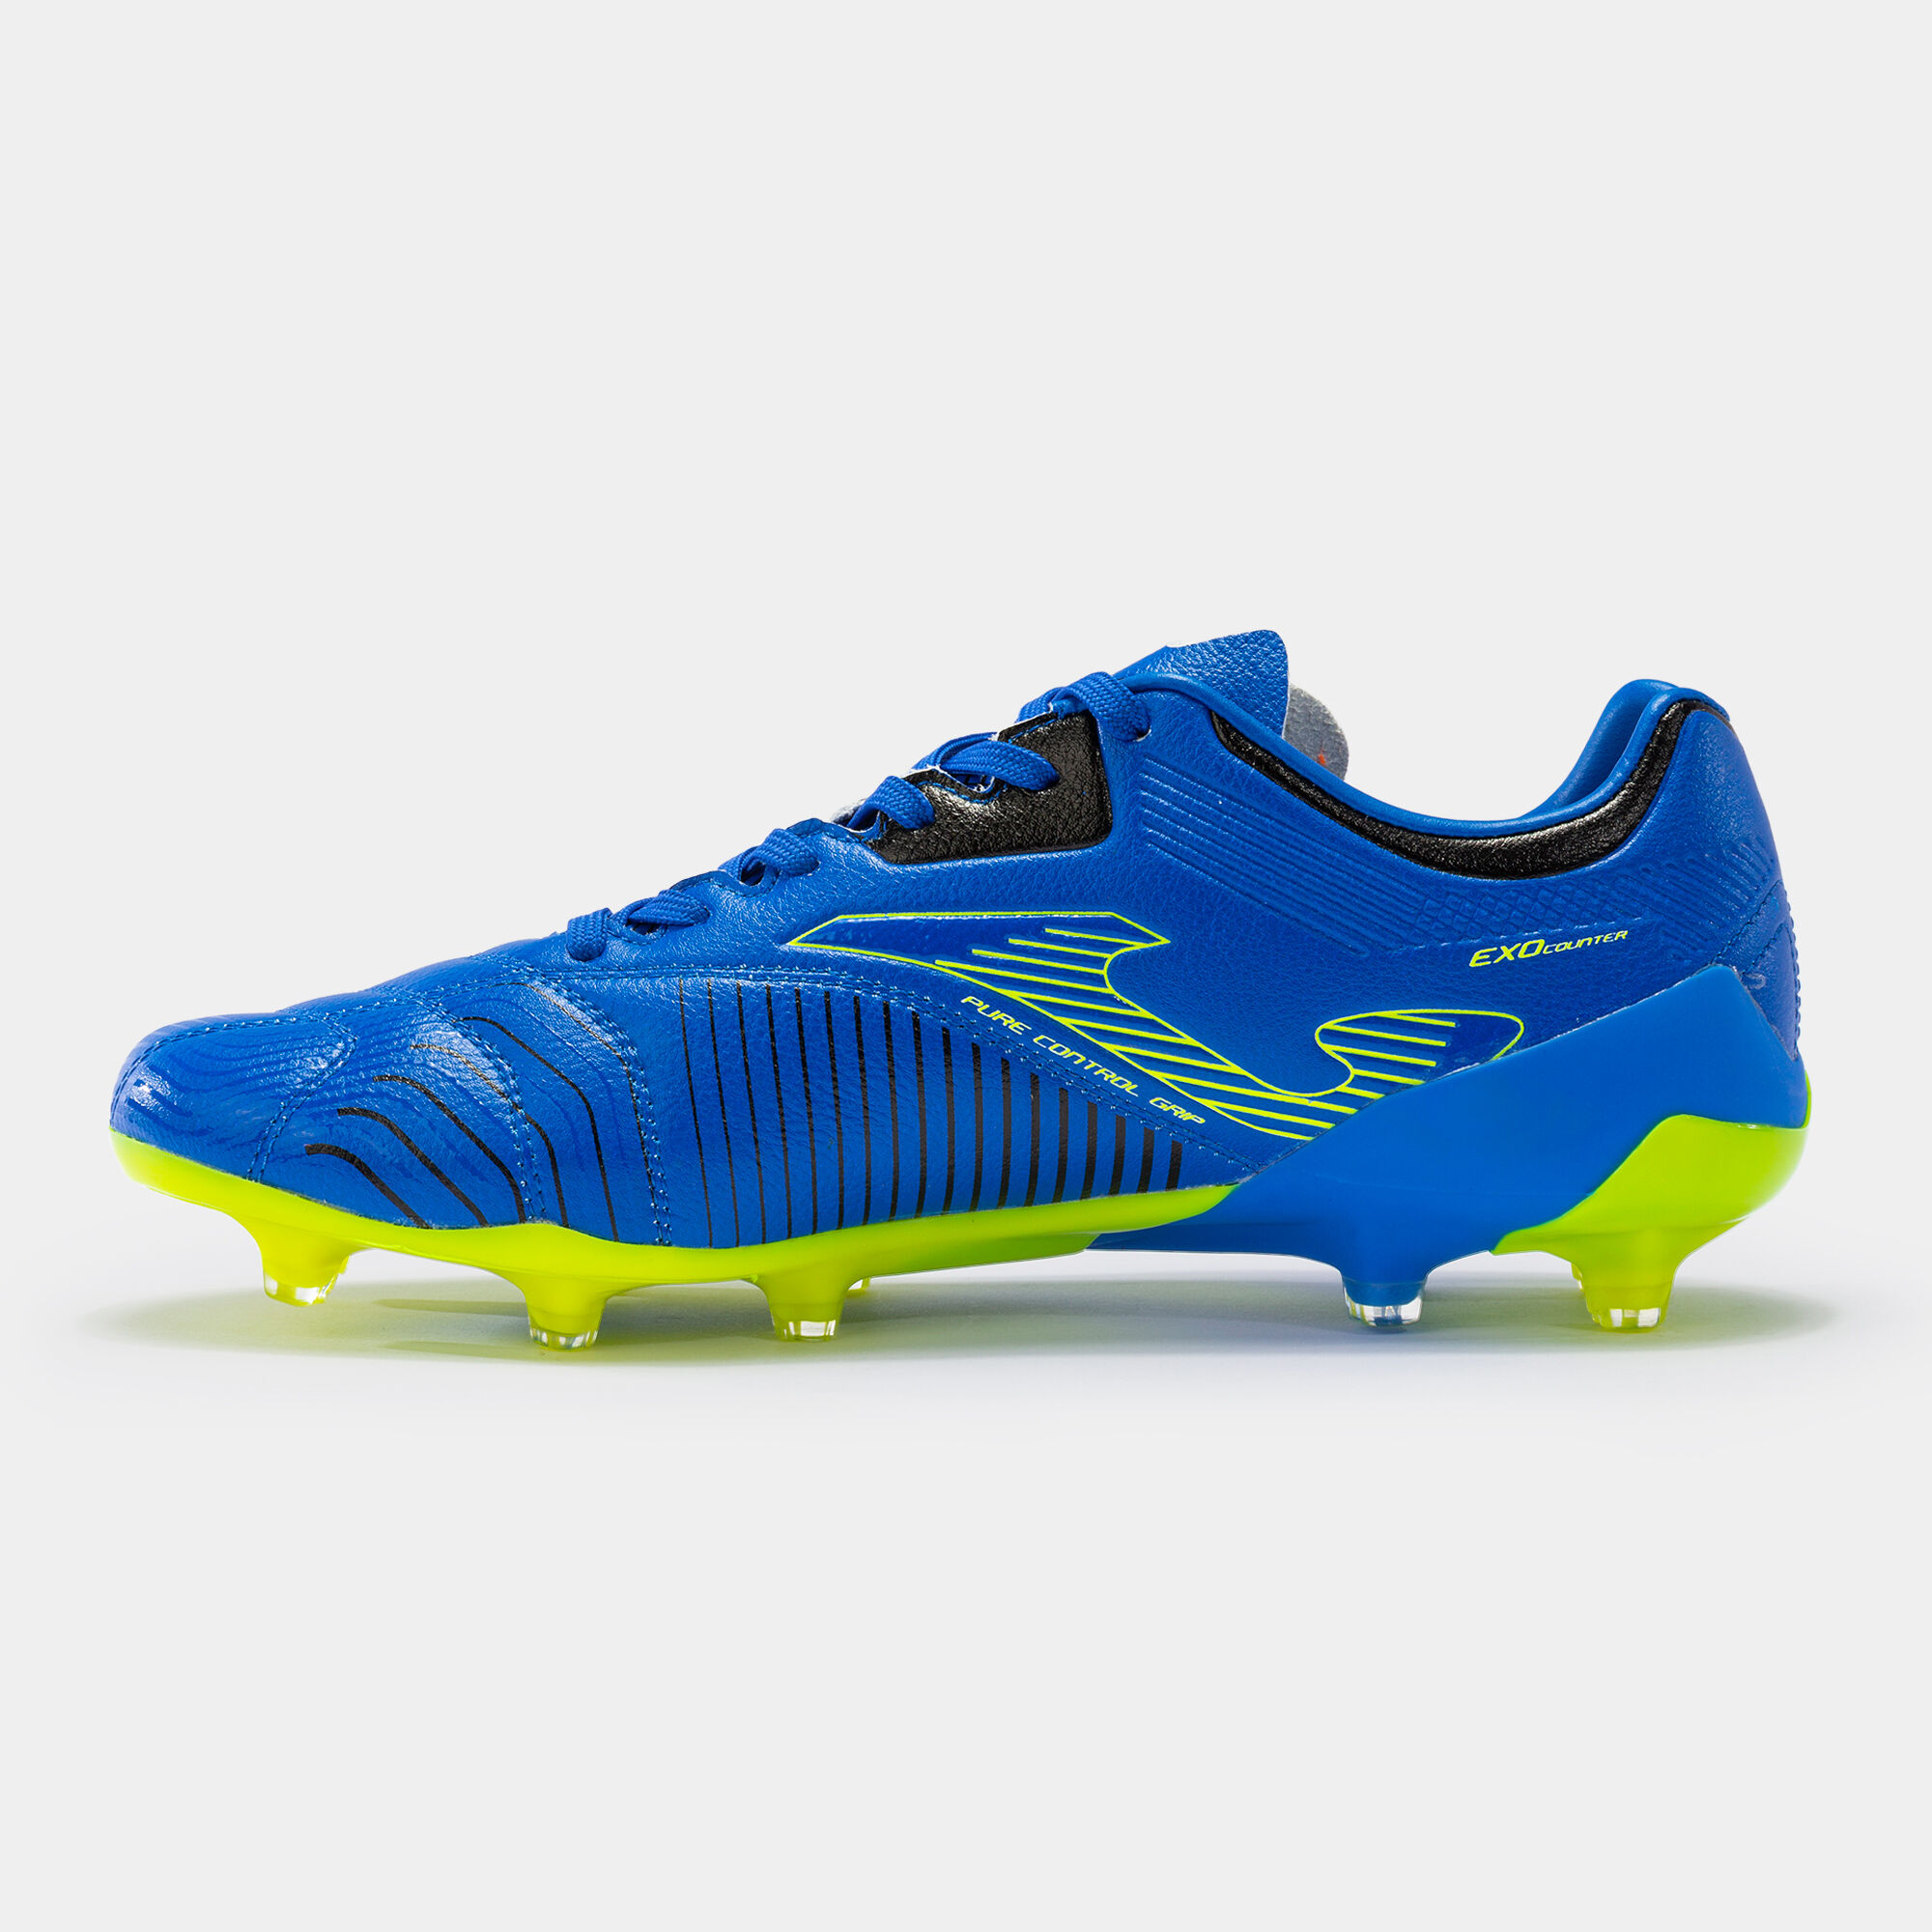 Football boots Score 23 firm ground FG royal blue